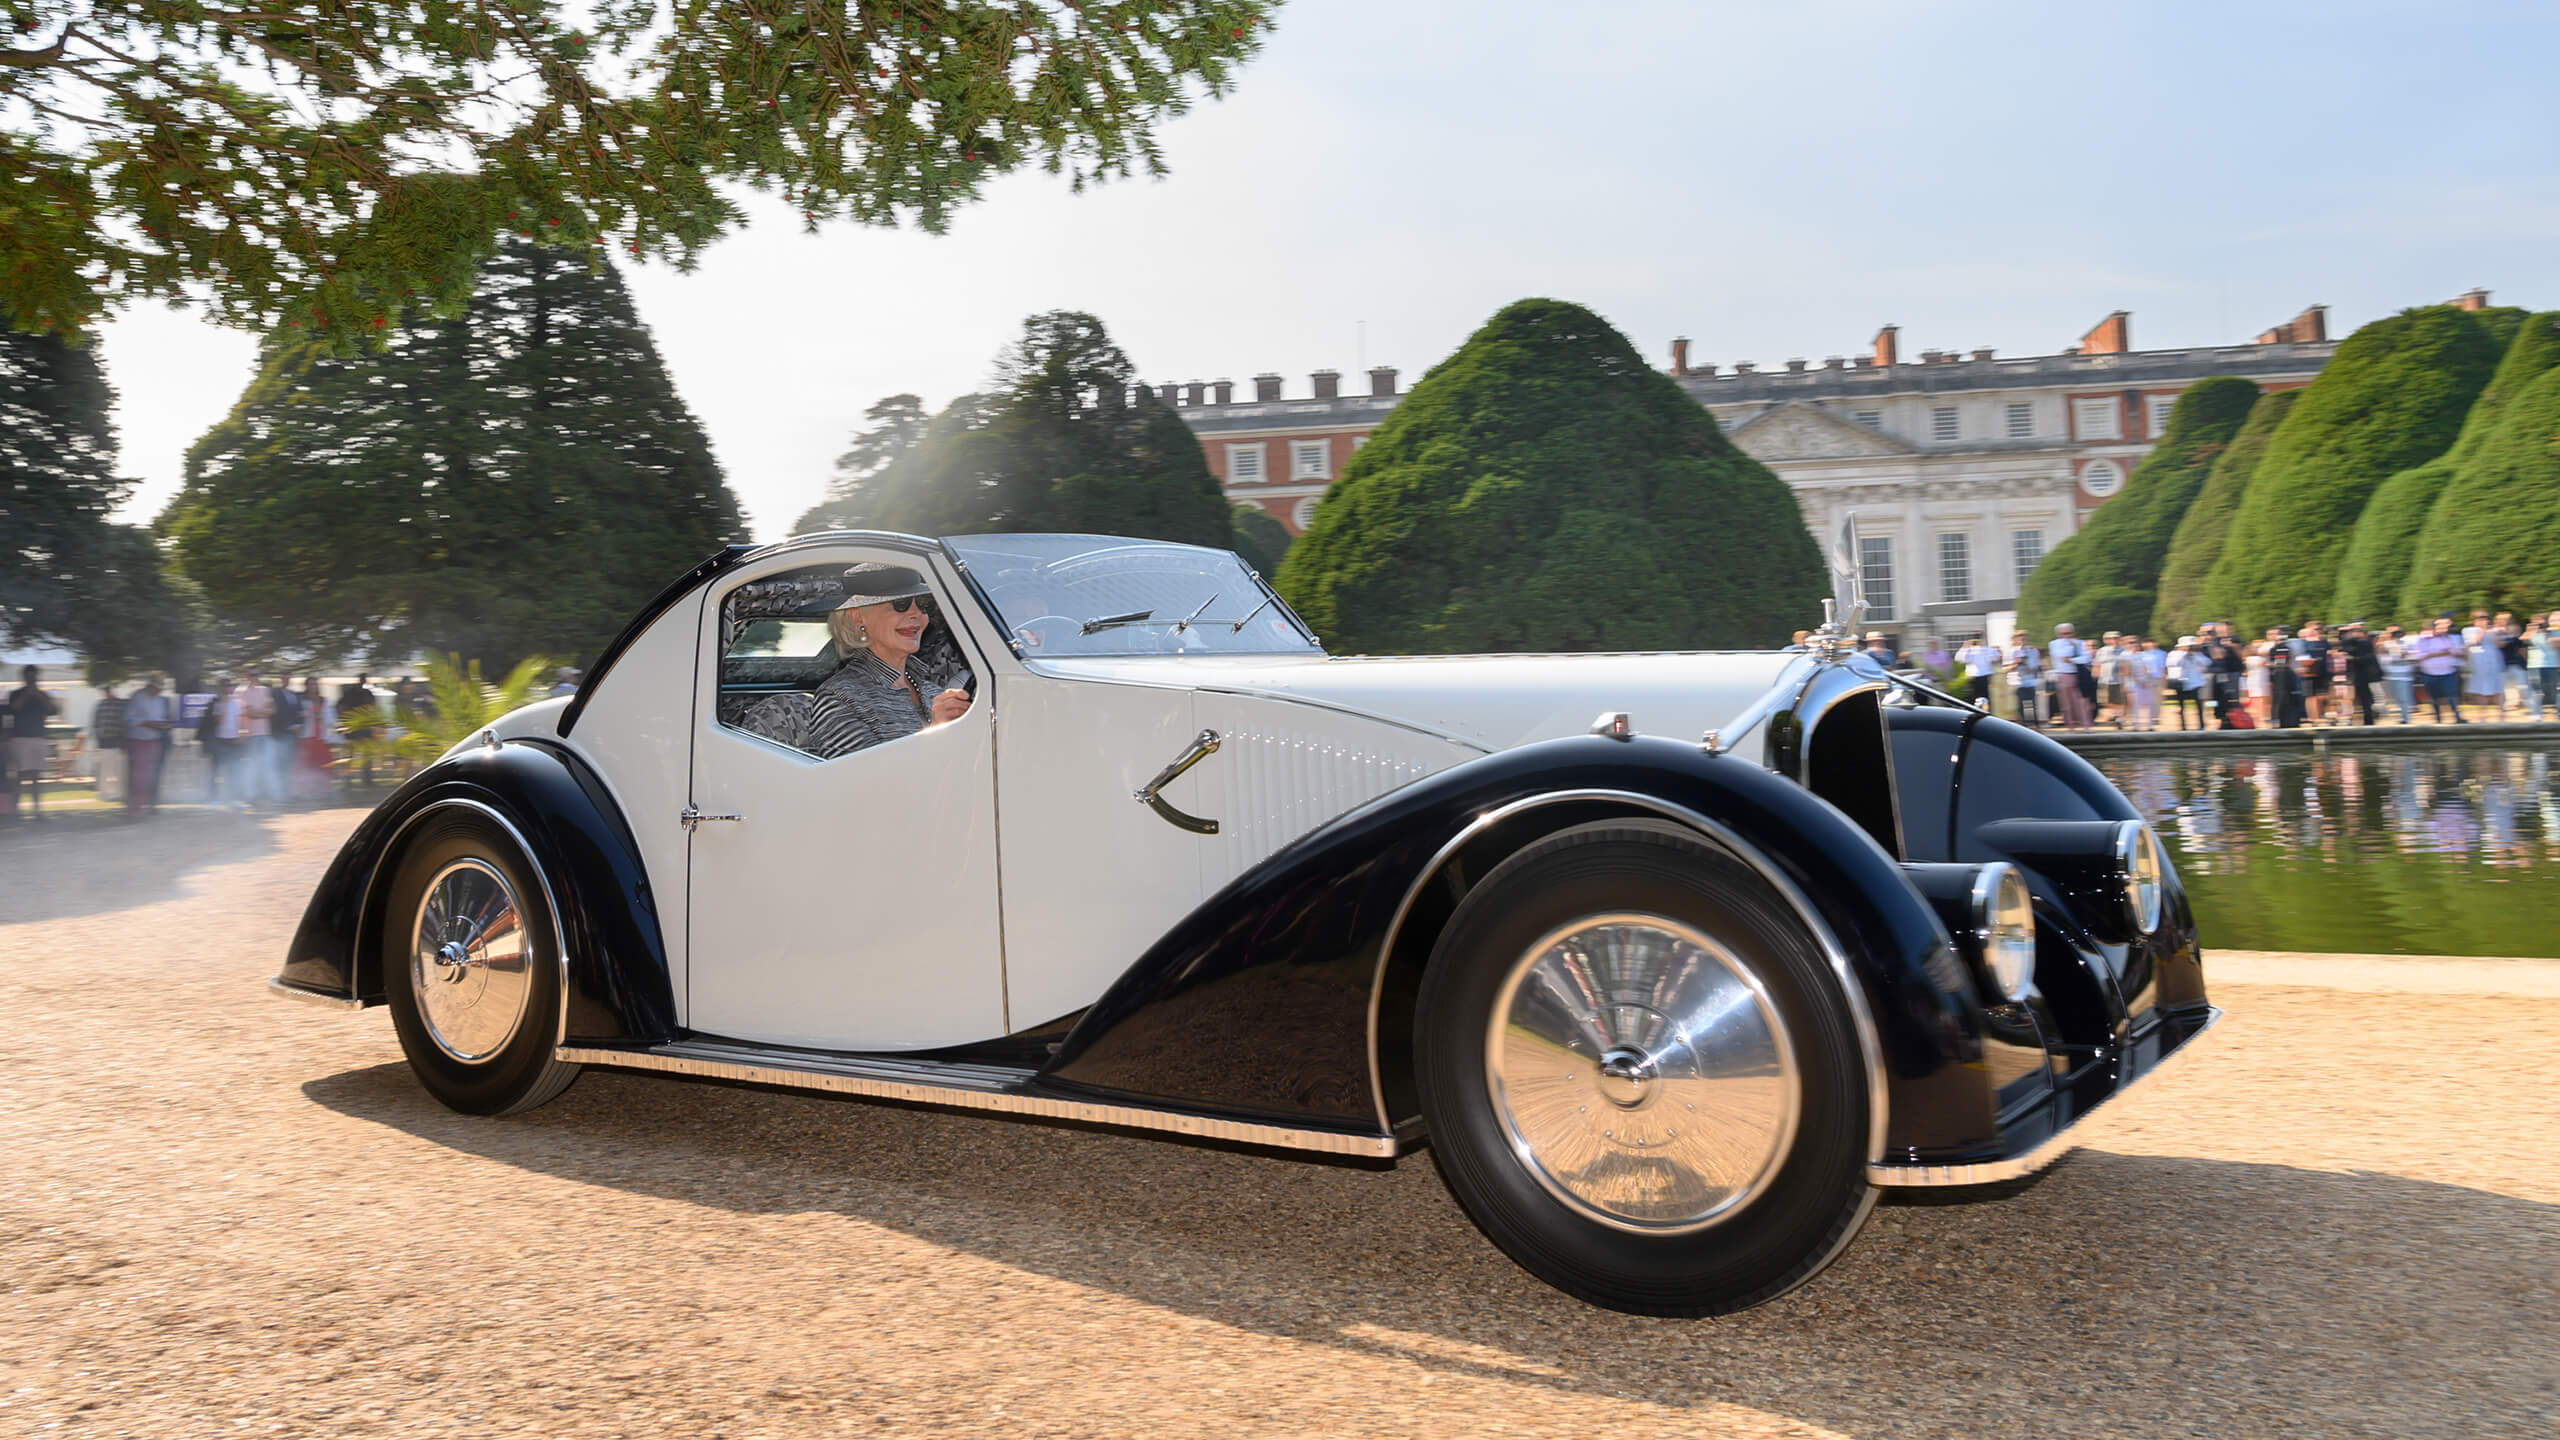 2021 Concours of Elegance: the French storm the Palace